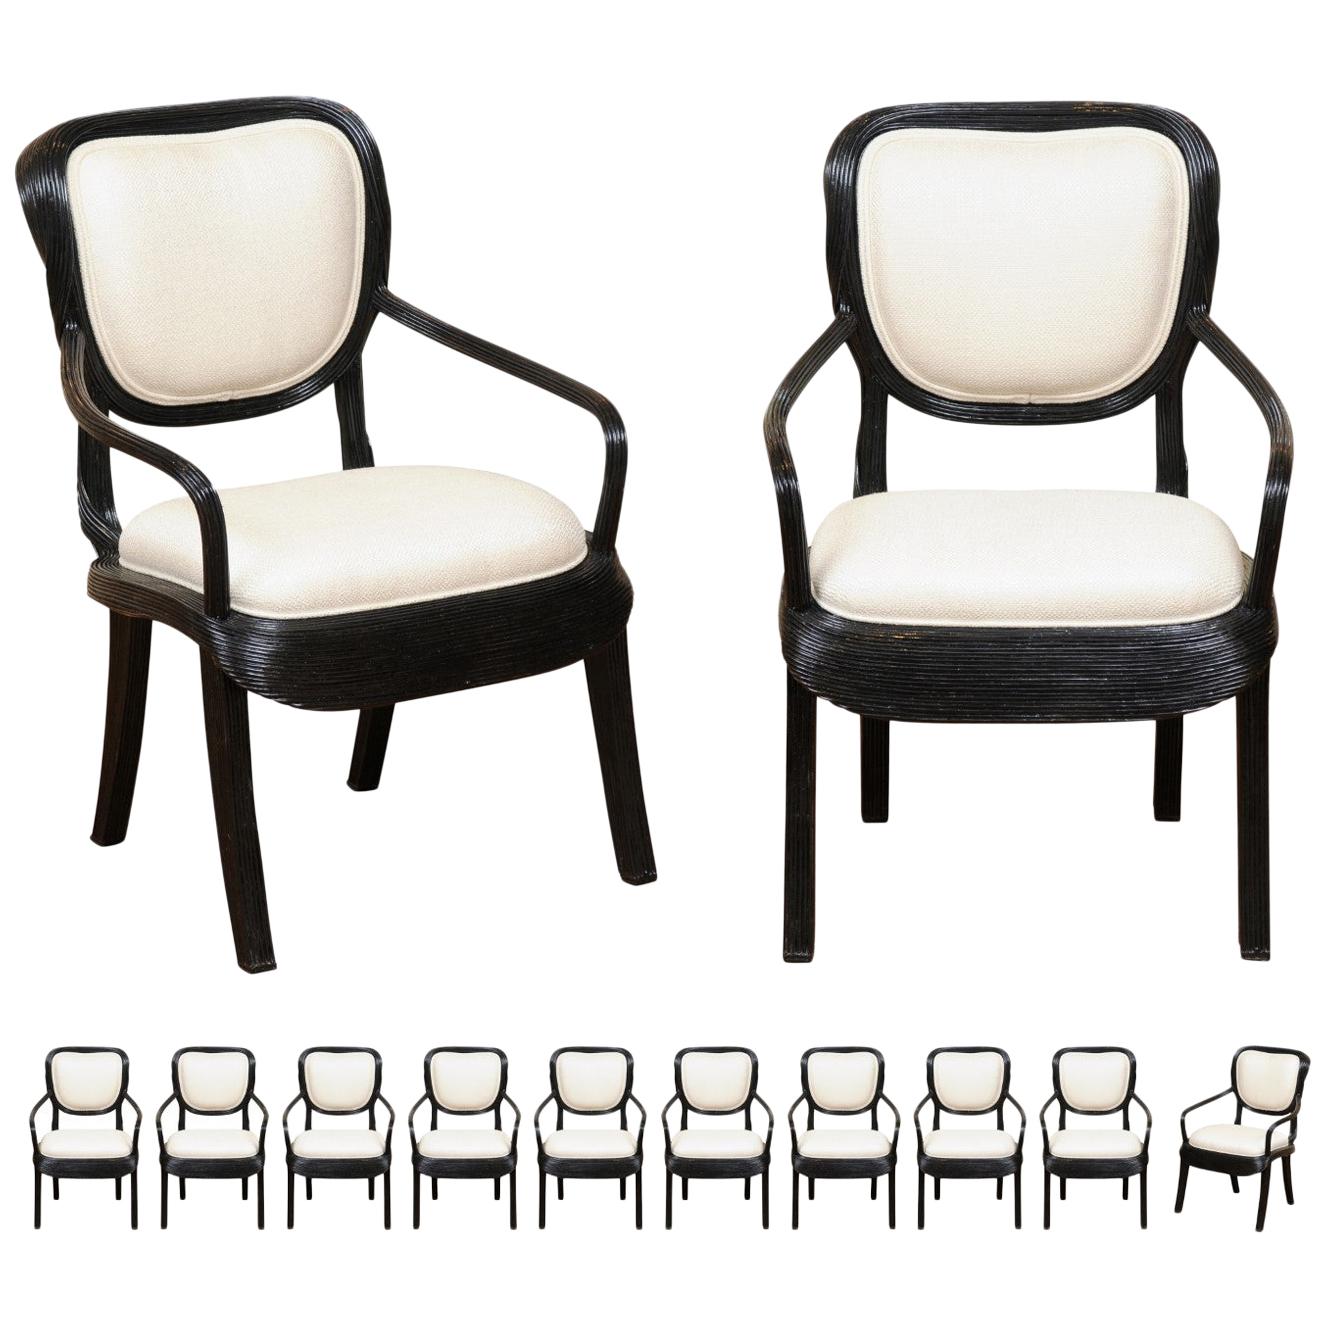 Extraordinary Set of 12 Trompe L'oiel Dining Chairs by Cobonpue, circa 1980